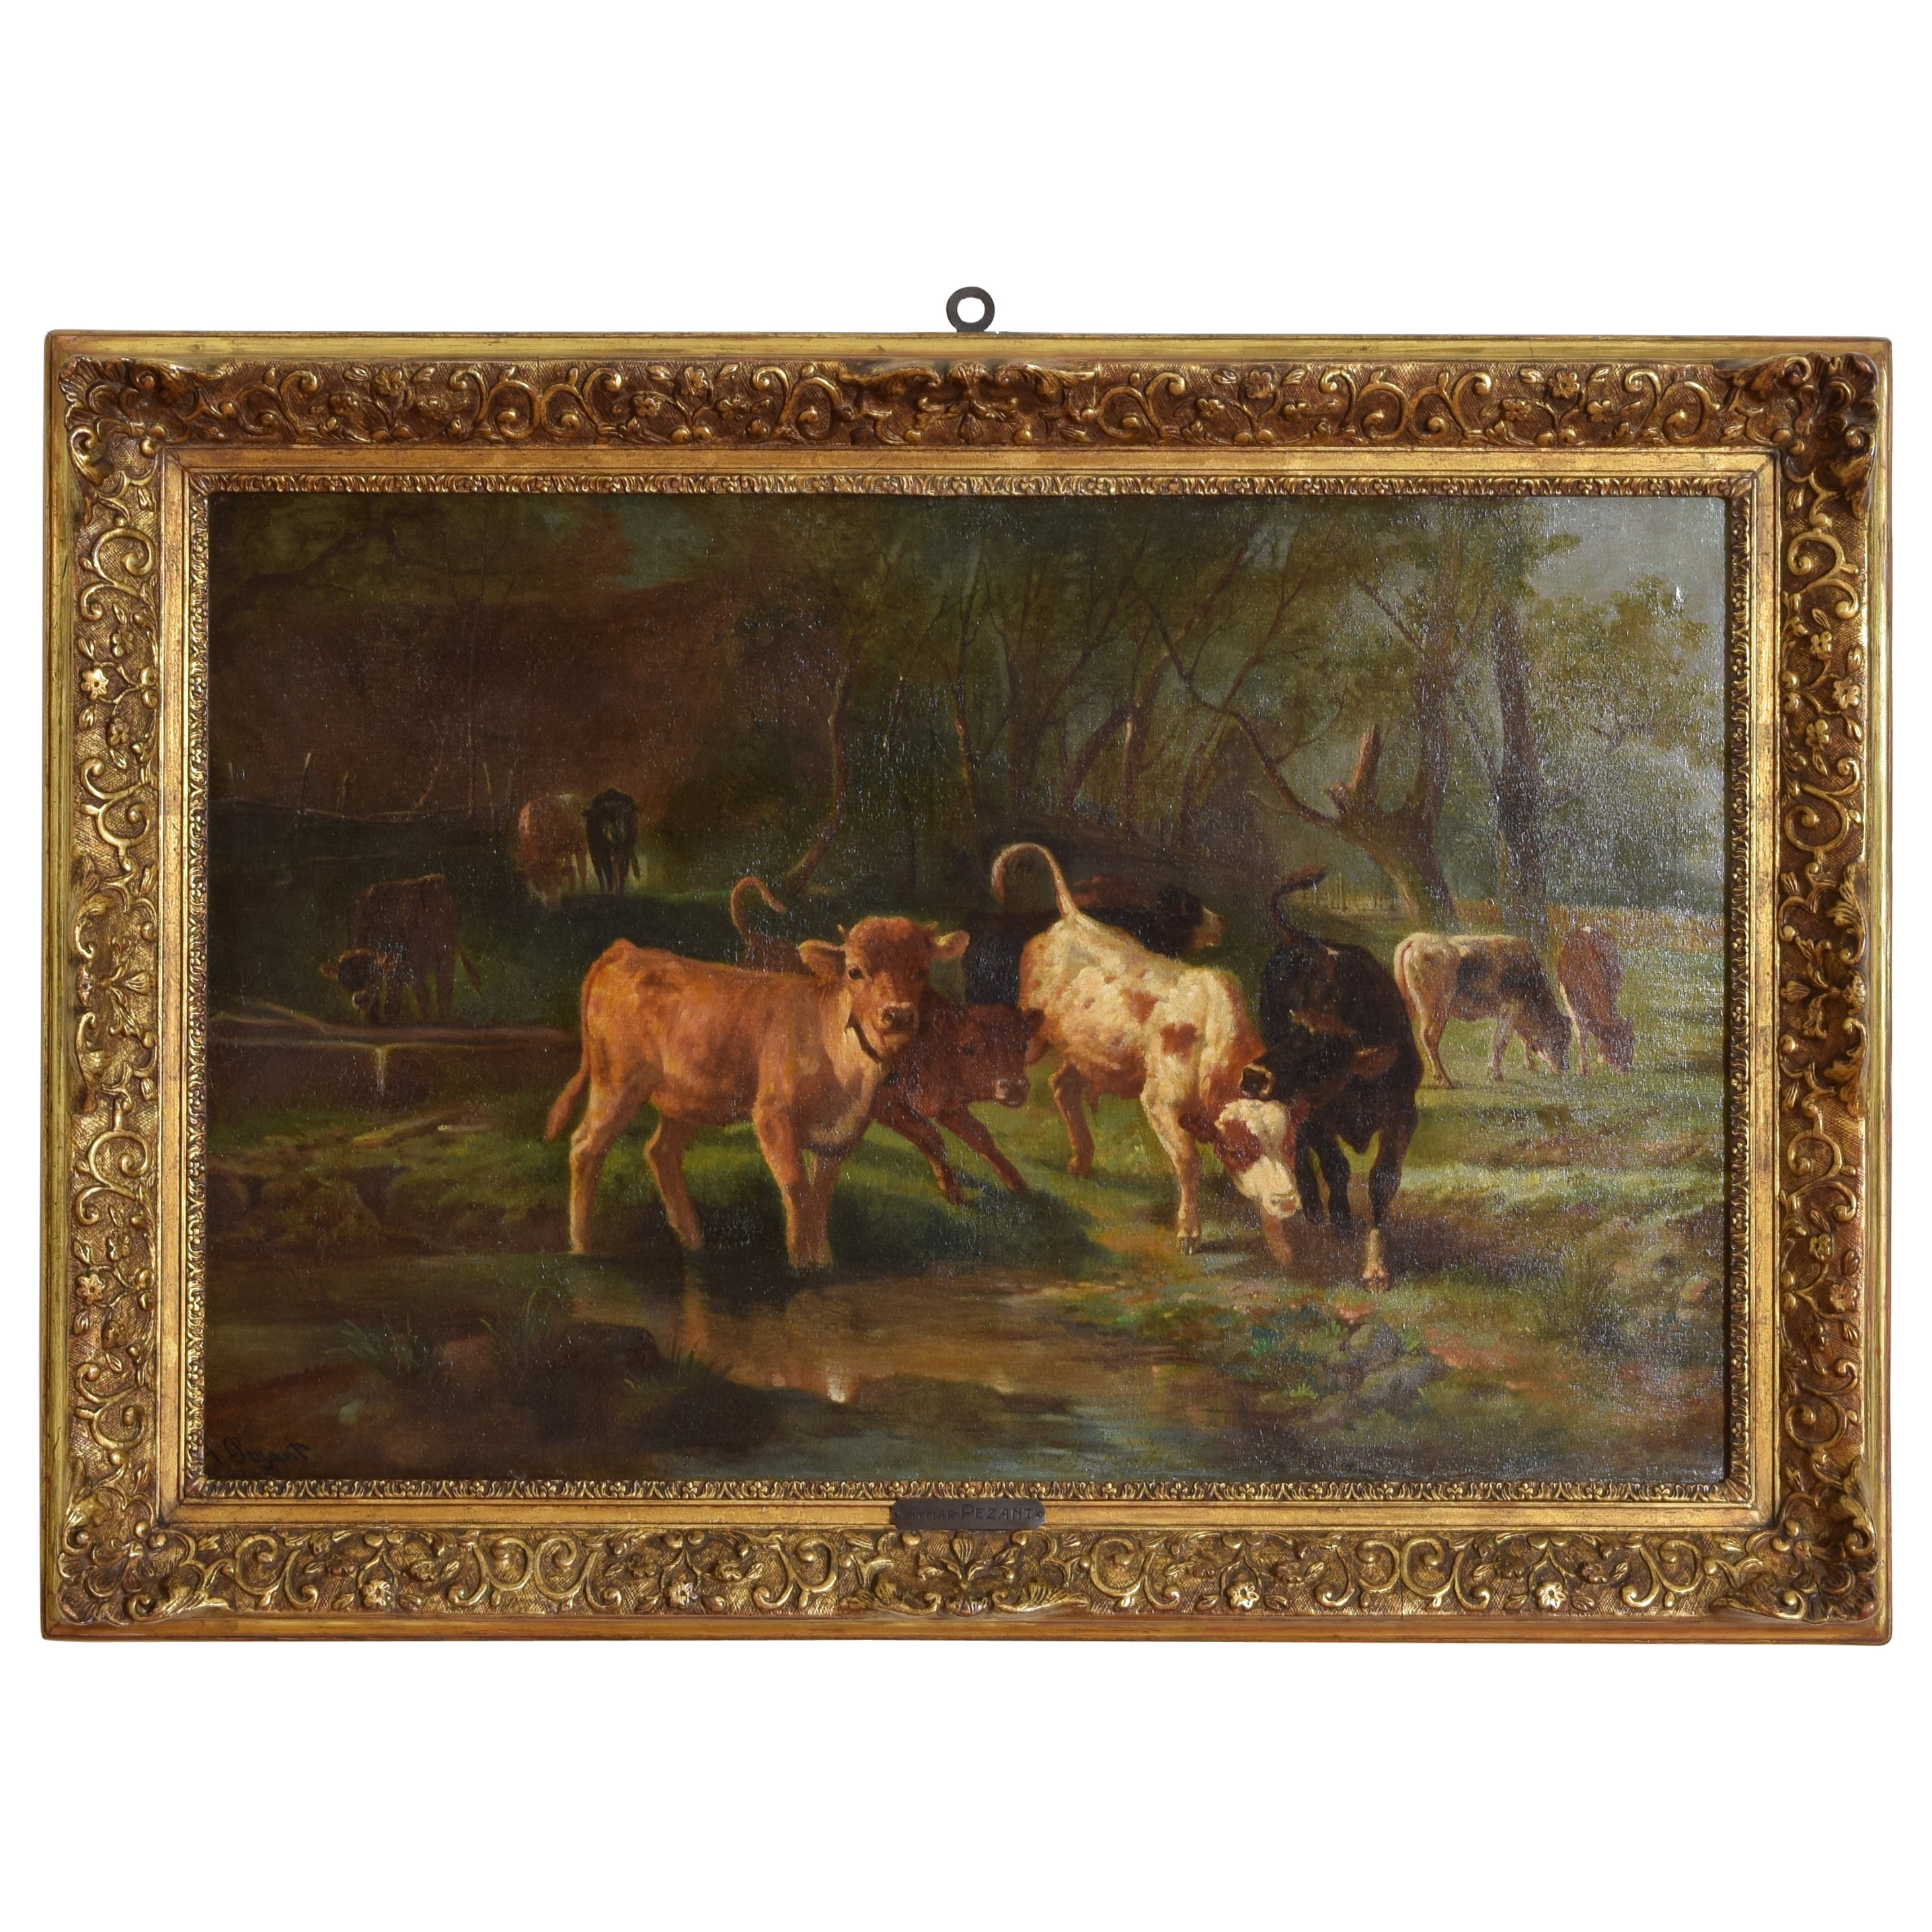 Oil on Canvas, “Cows Watering at Stream, Aymar Pezant, 1846-1916